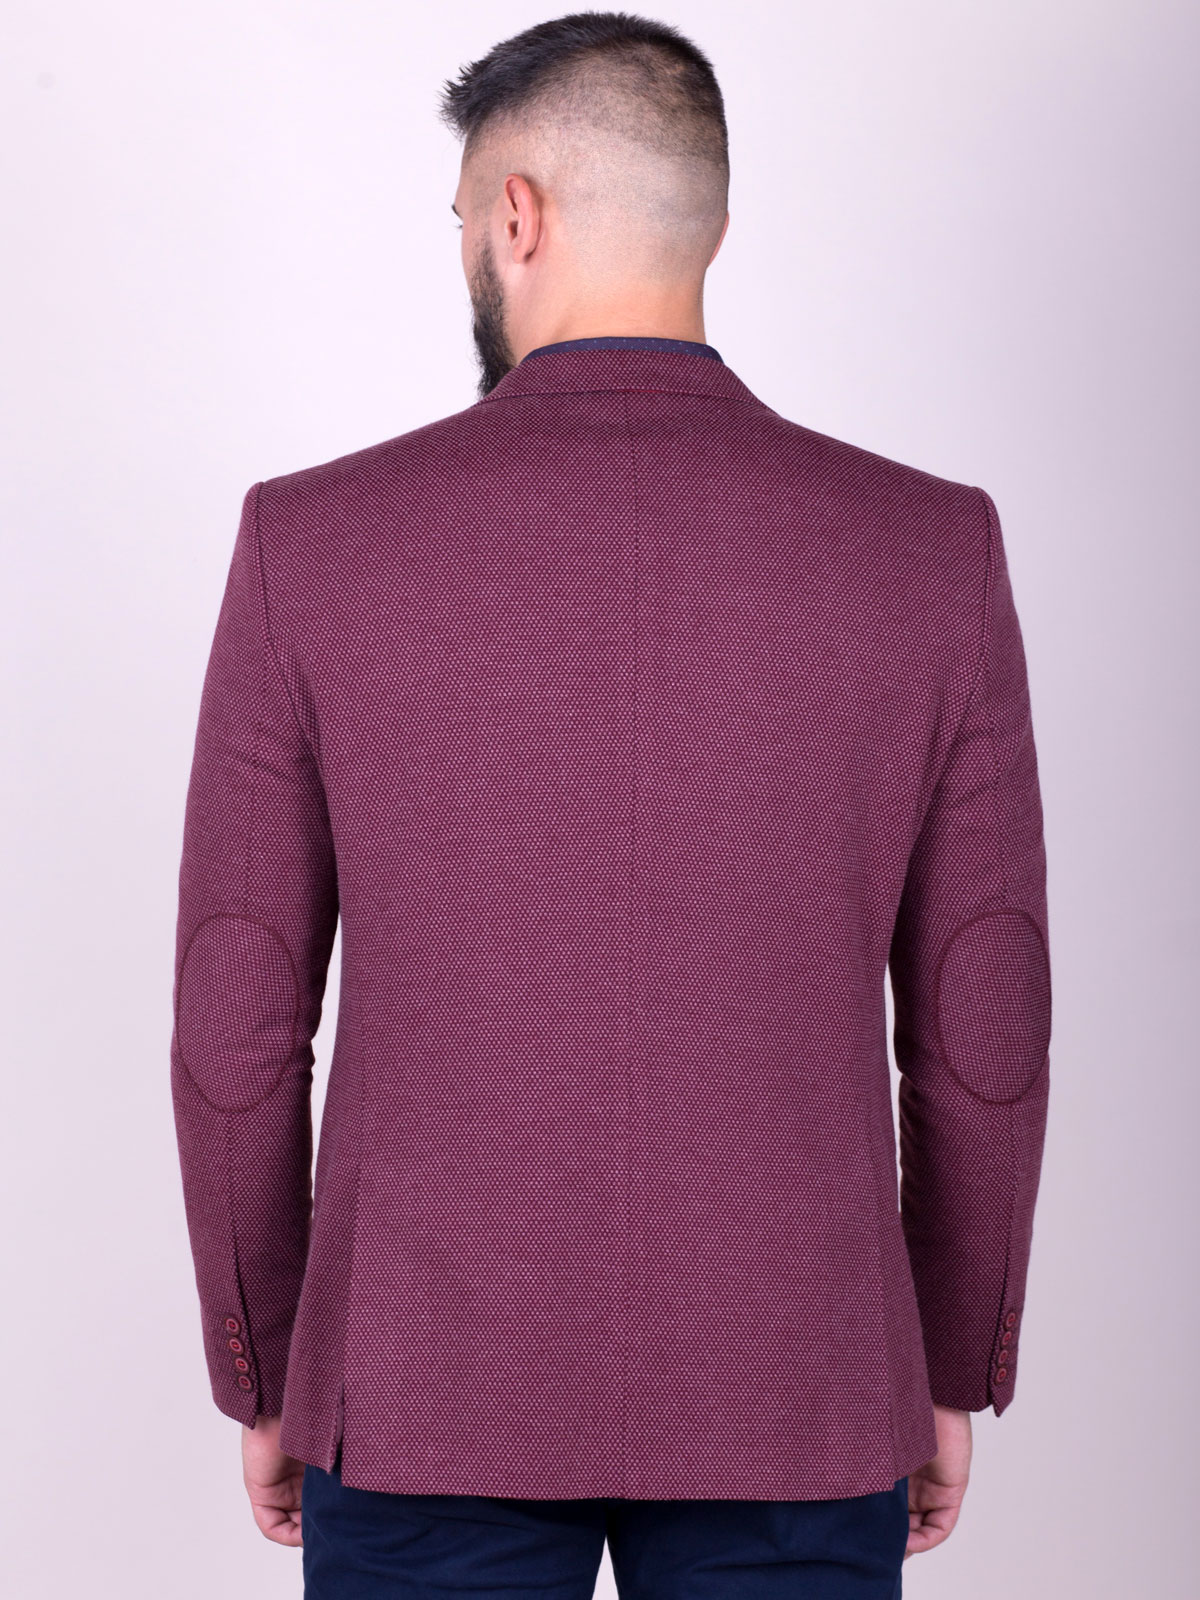 Jacket with armrests in raspberry color - 61073 € 50.06 img4